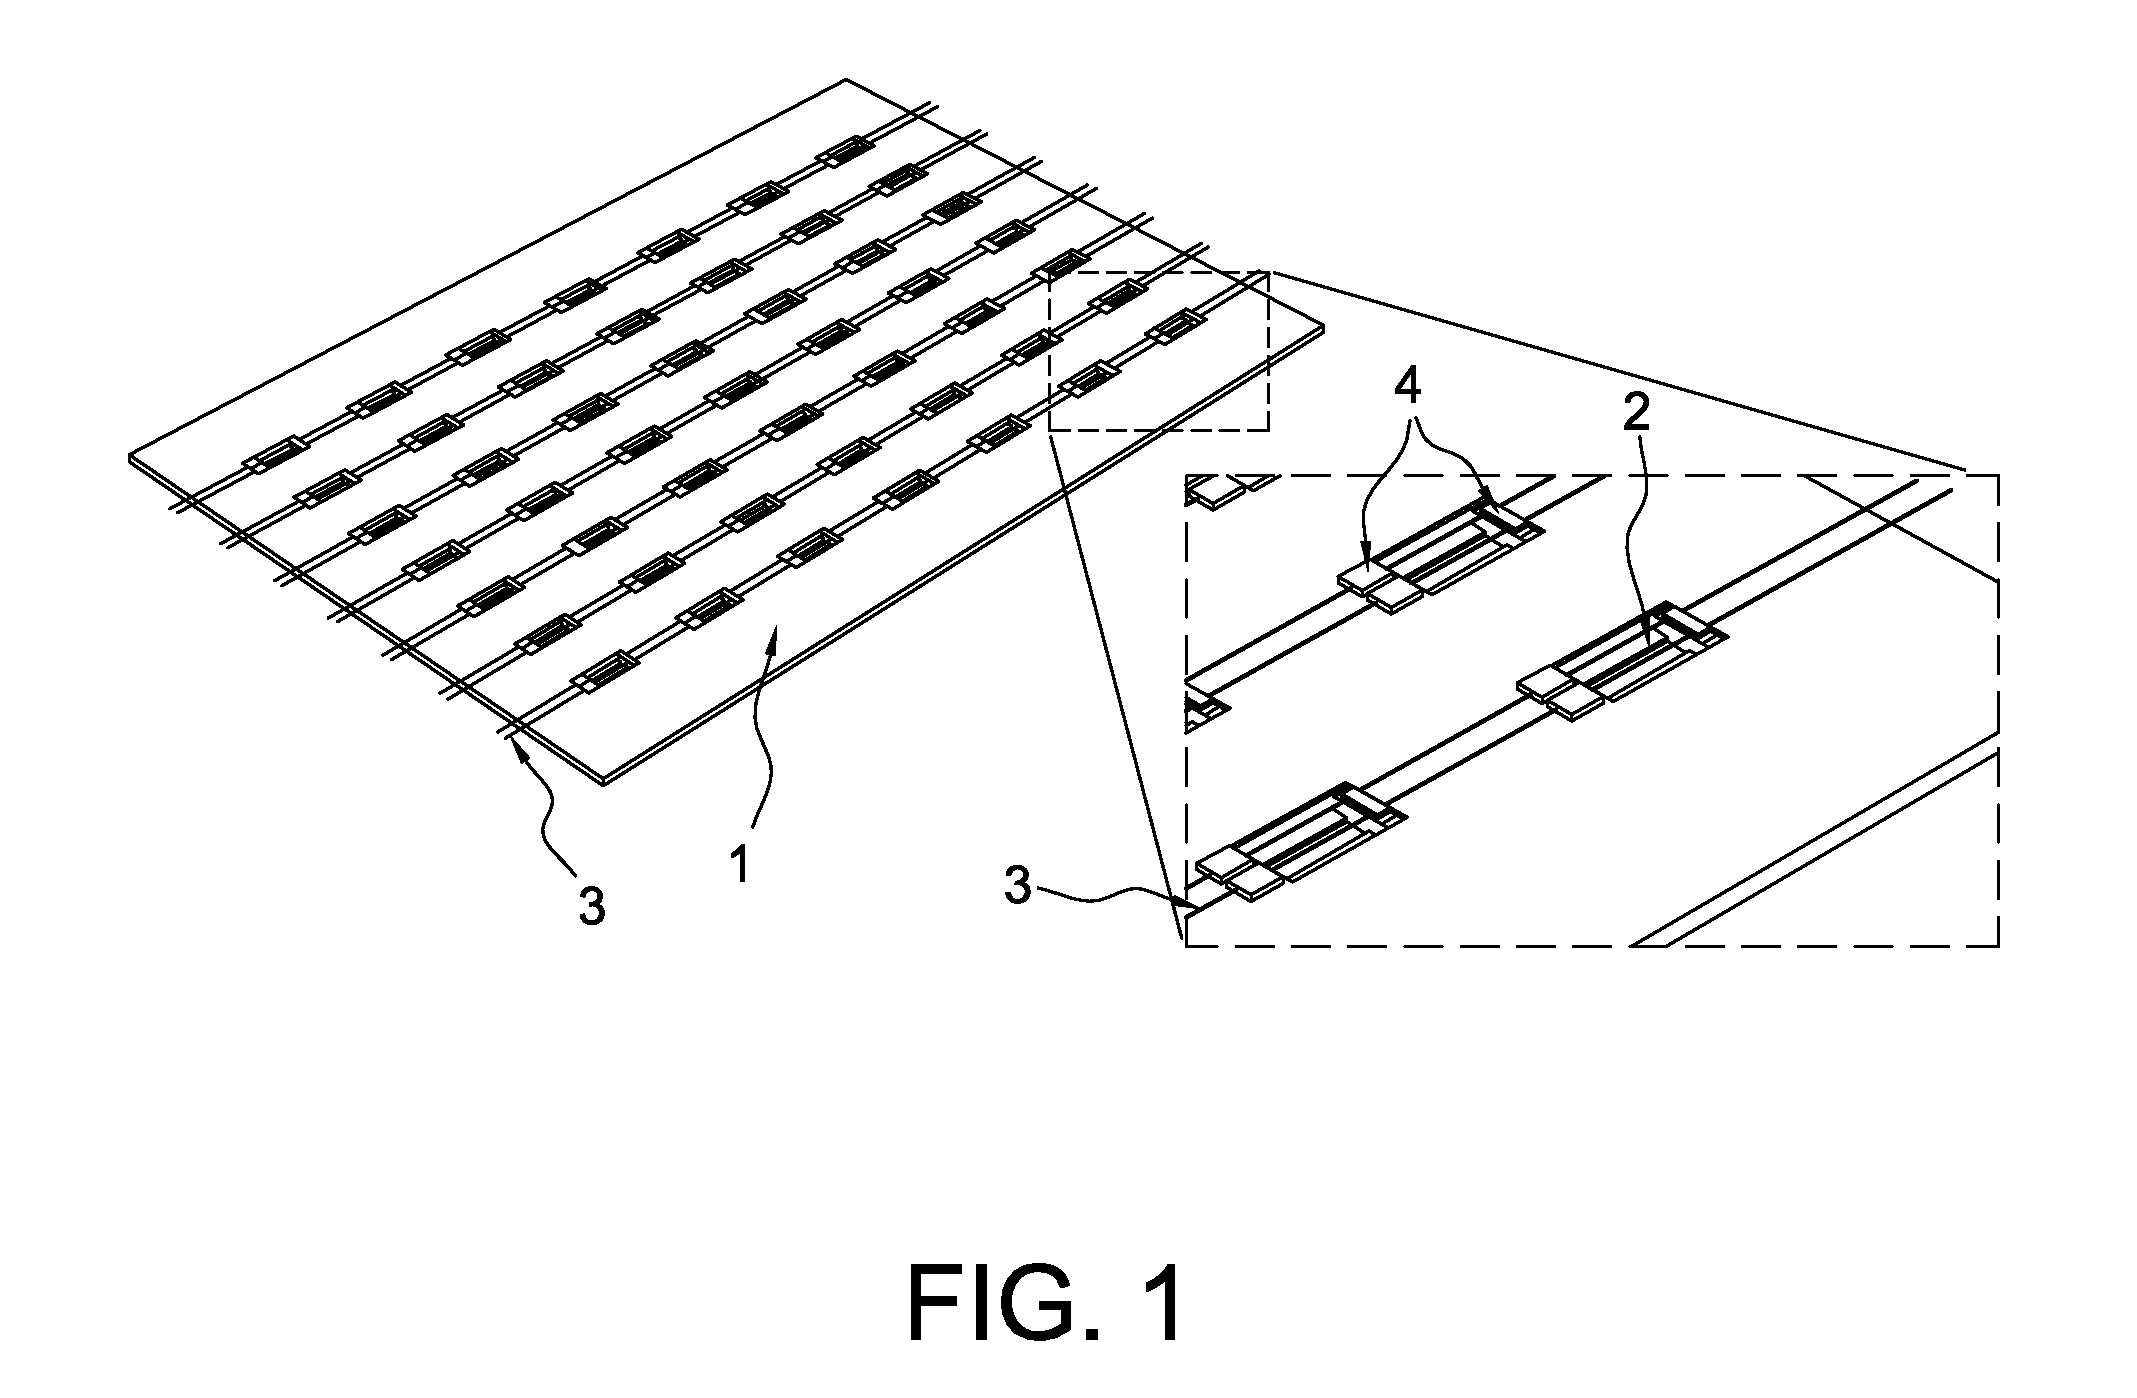 Method for mechanical and electrical integration of sma wires to microsystems